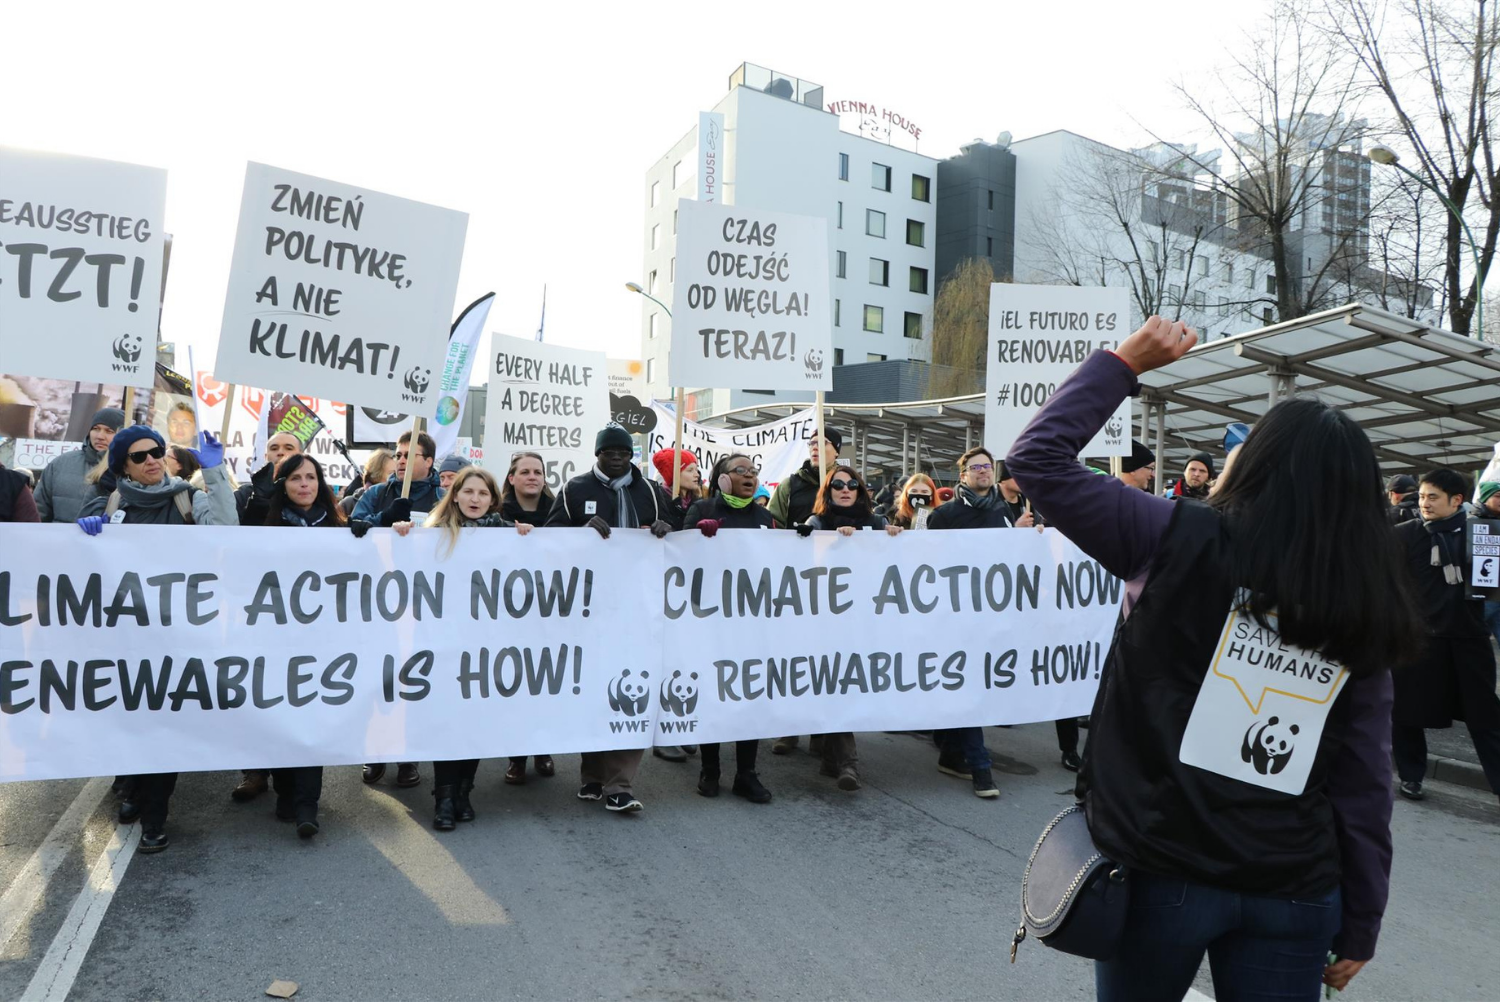 People's Climate March in Poland, Katowice for the 24th Conference of the Parties to the United Nations Framework Convention on Climate Change (COP24) 2018.